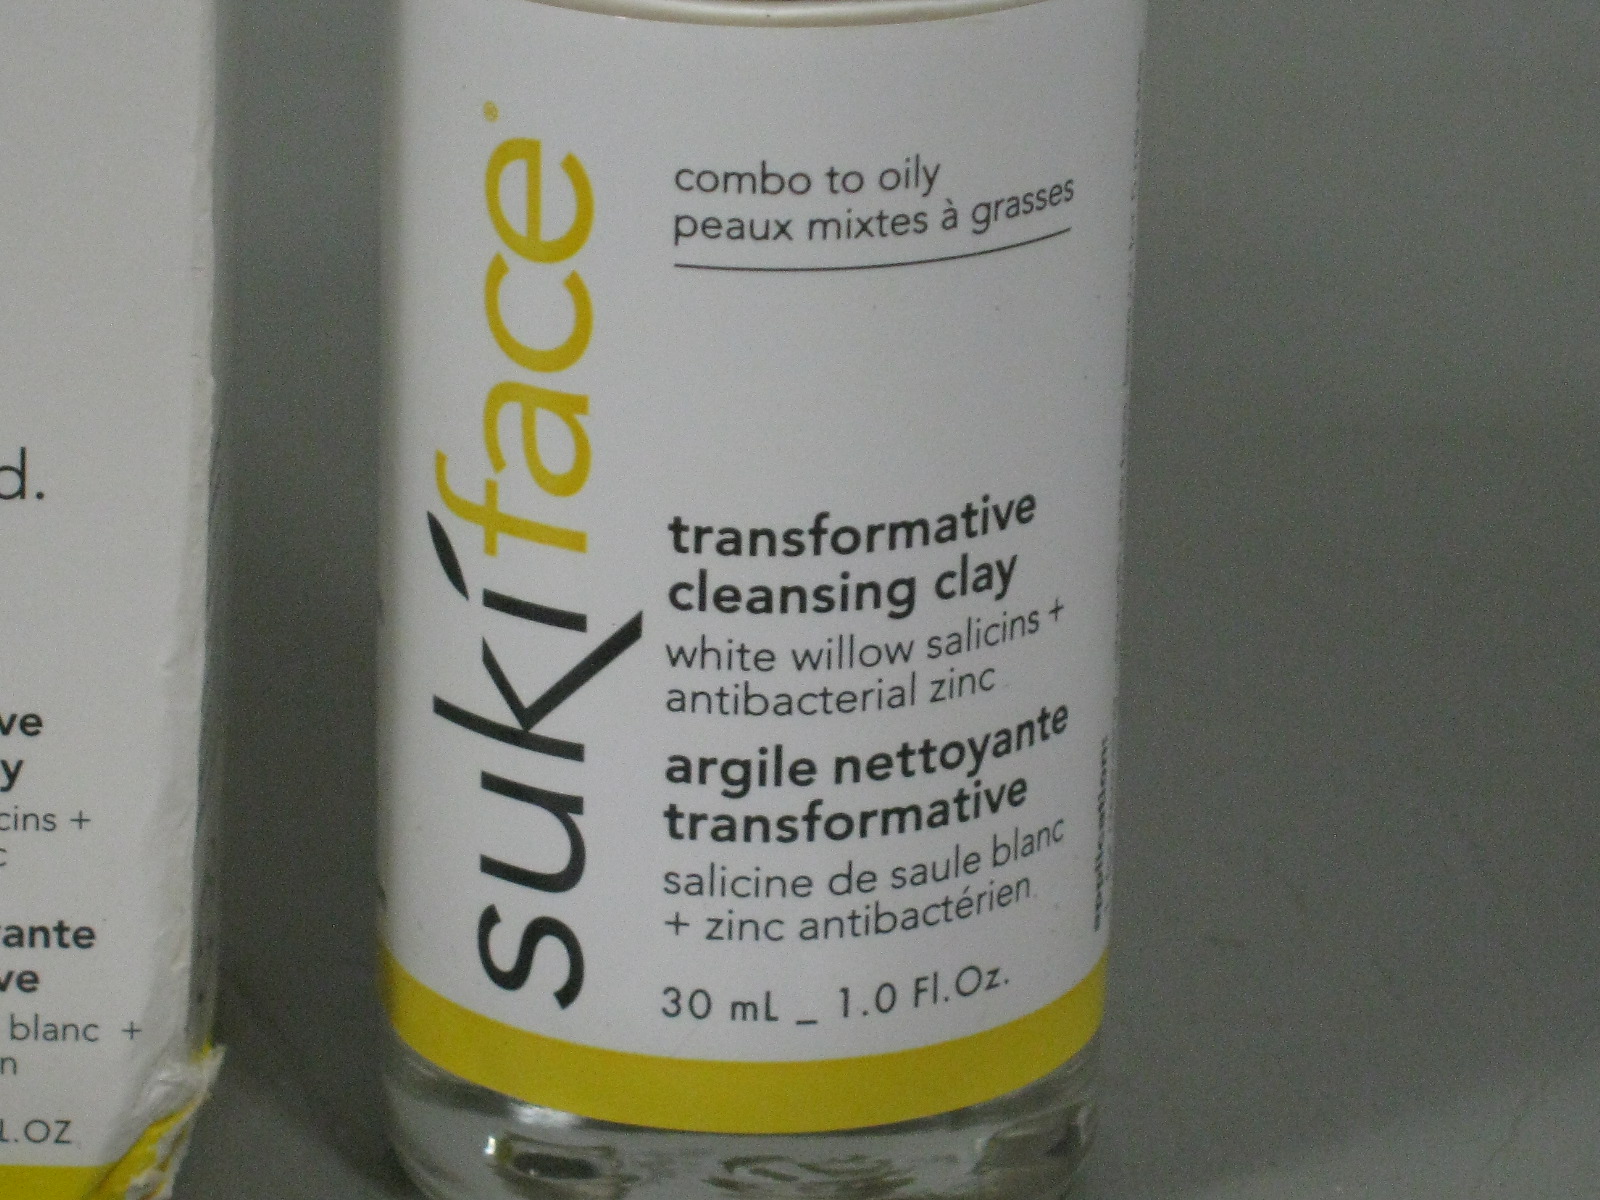 2 NEW Bottles Sukiface Creamy Foaming Cleanser + Transformative Cleansing Clay 3